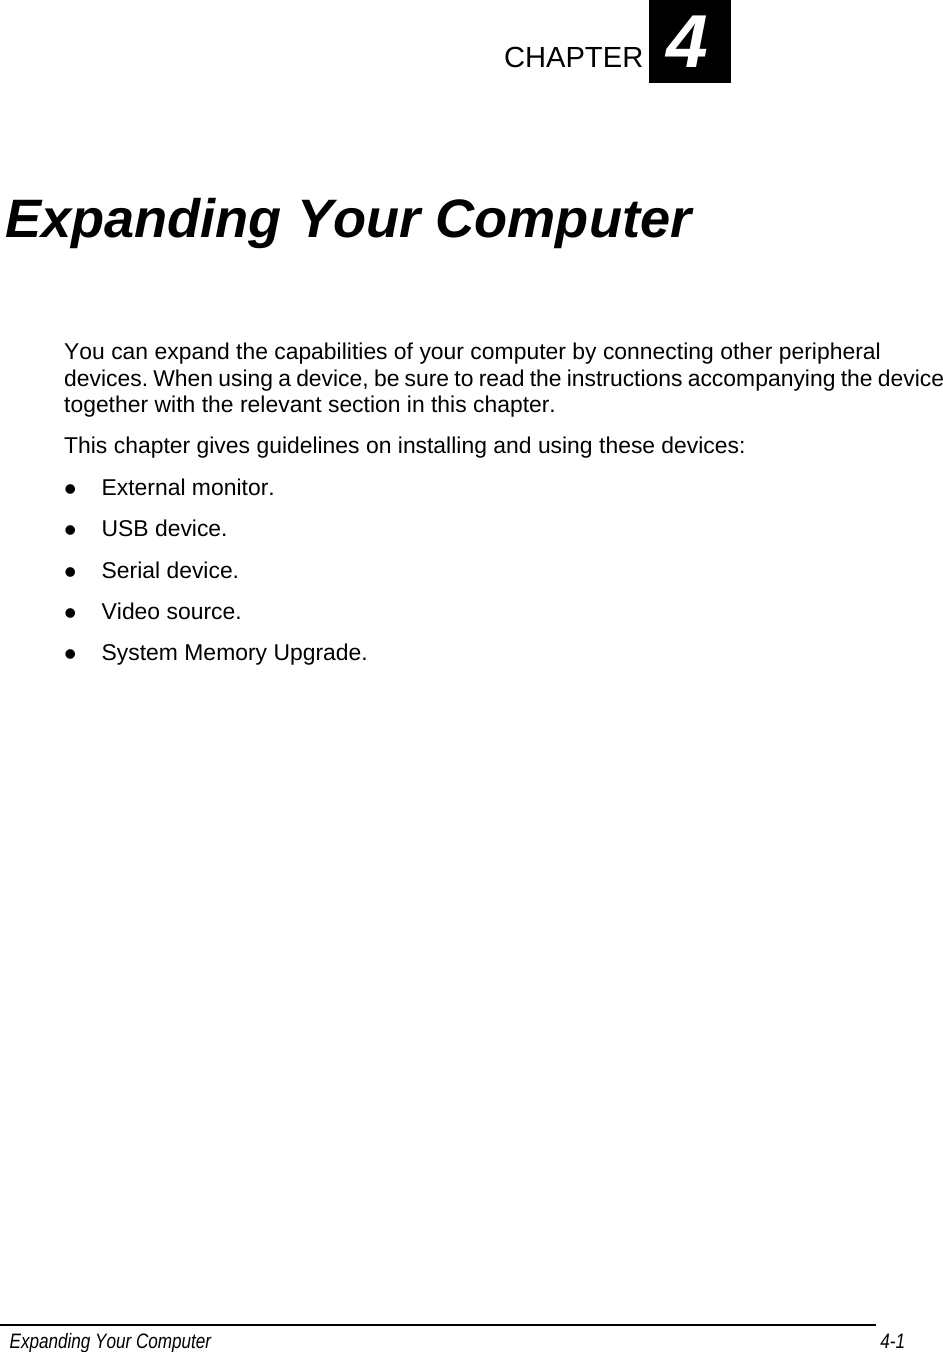  Expanding Your Computer  4-1    CHAPTER 4 Expanding Your Computer You can expand the capabilities of your computer by connecting other peripheral devices. When using a device, be sure to read the instructions accompanying the device together with the relevant section in this chapter. This chapter gives guidelines on installing and using these devices: z External monitor. z USB device. z Serial device. z Video source. z System Memory Upgrade.  